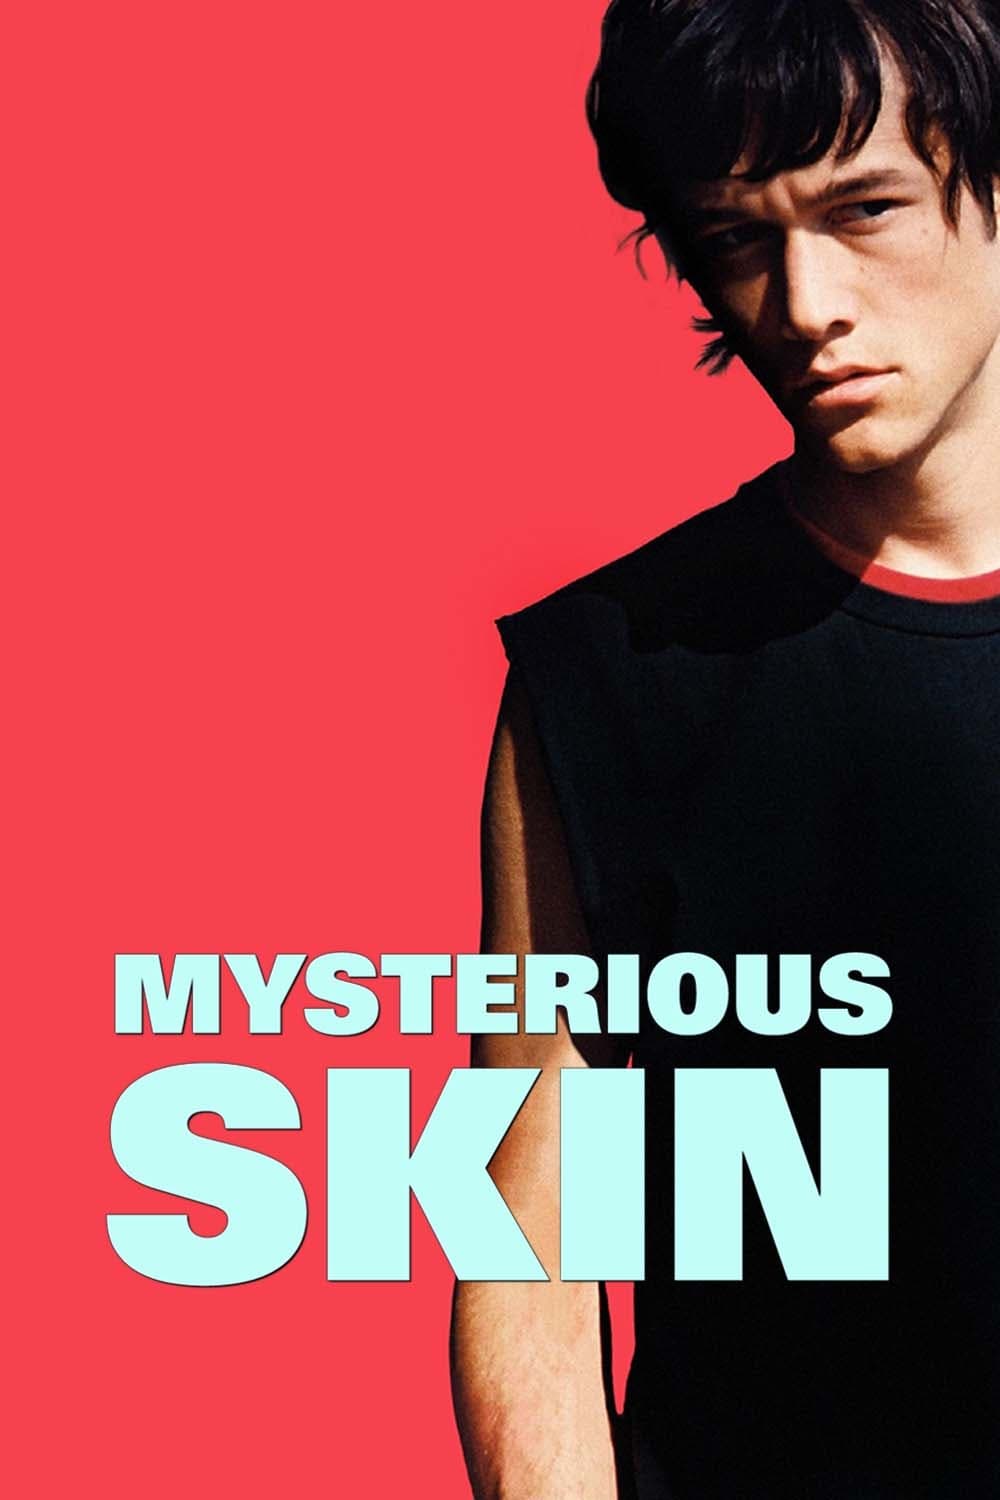 Mysterious Skin [HD] (2004)